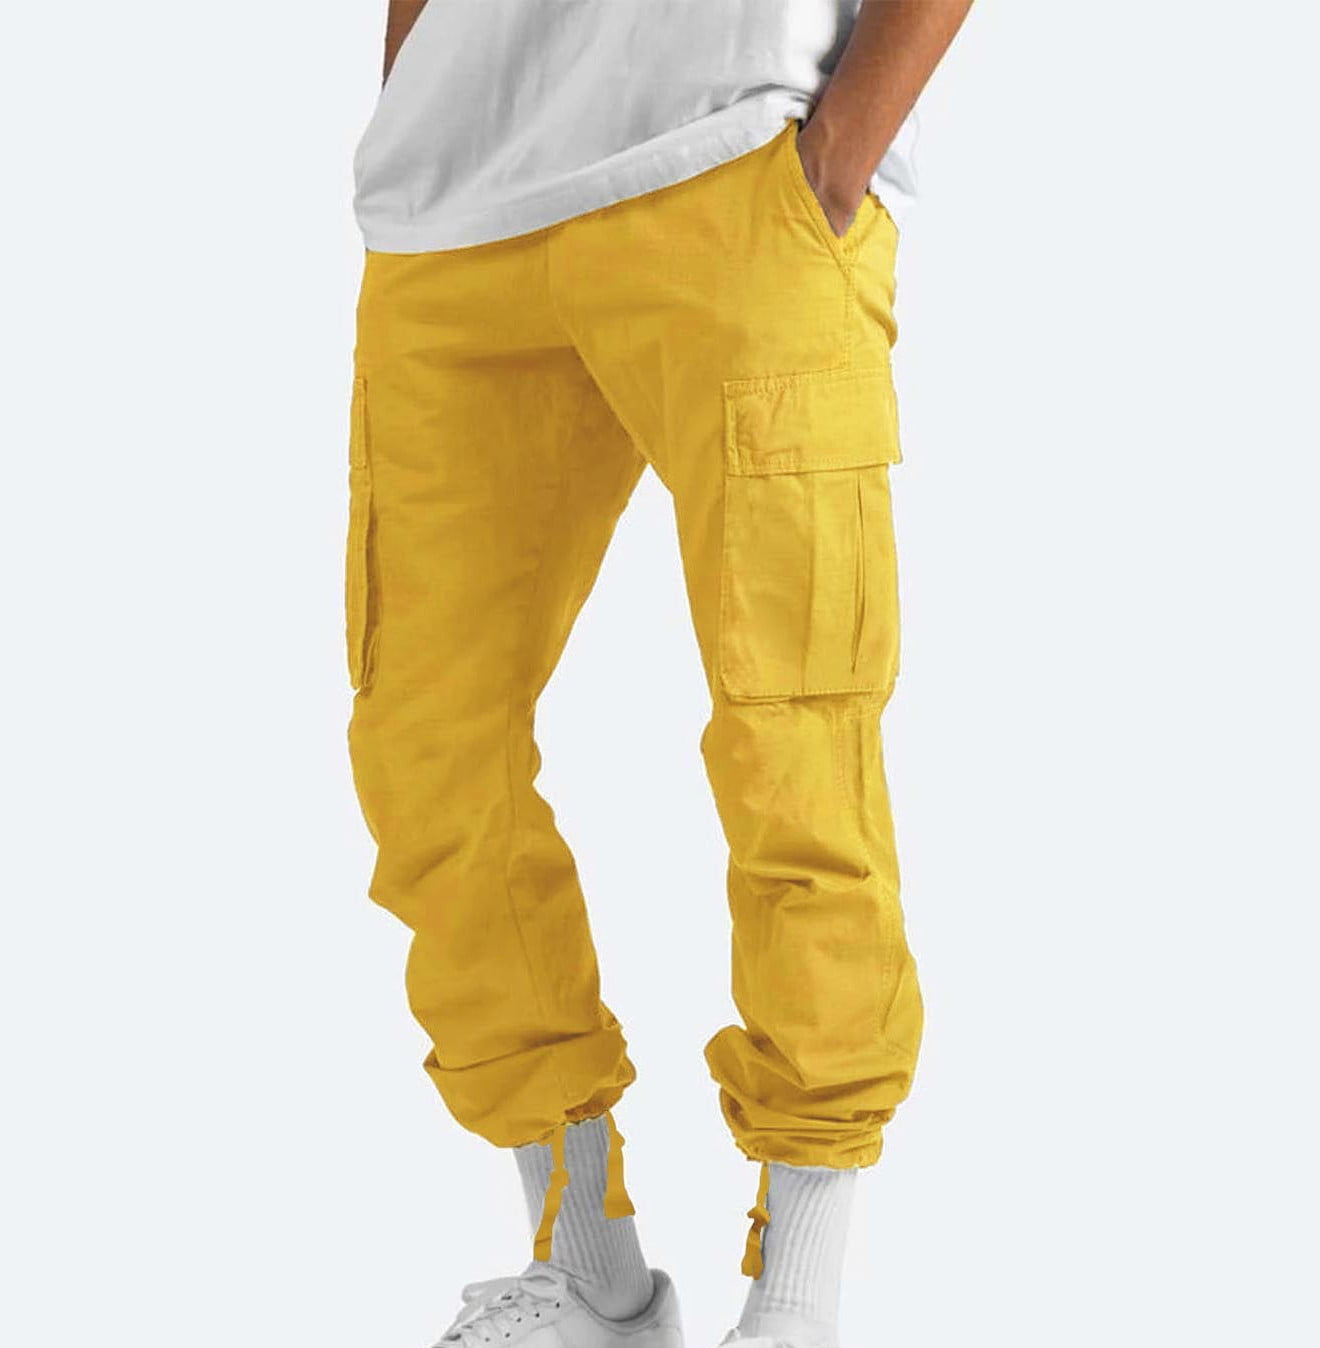 Leo Workwear CT01 Yellow High Visibility Superior Polycotton Cargo Trousers  | eBay